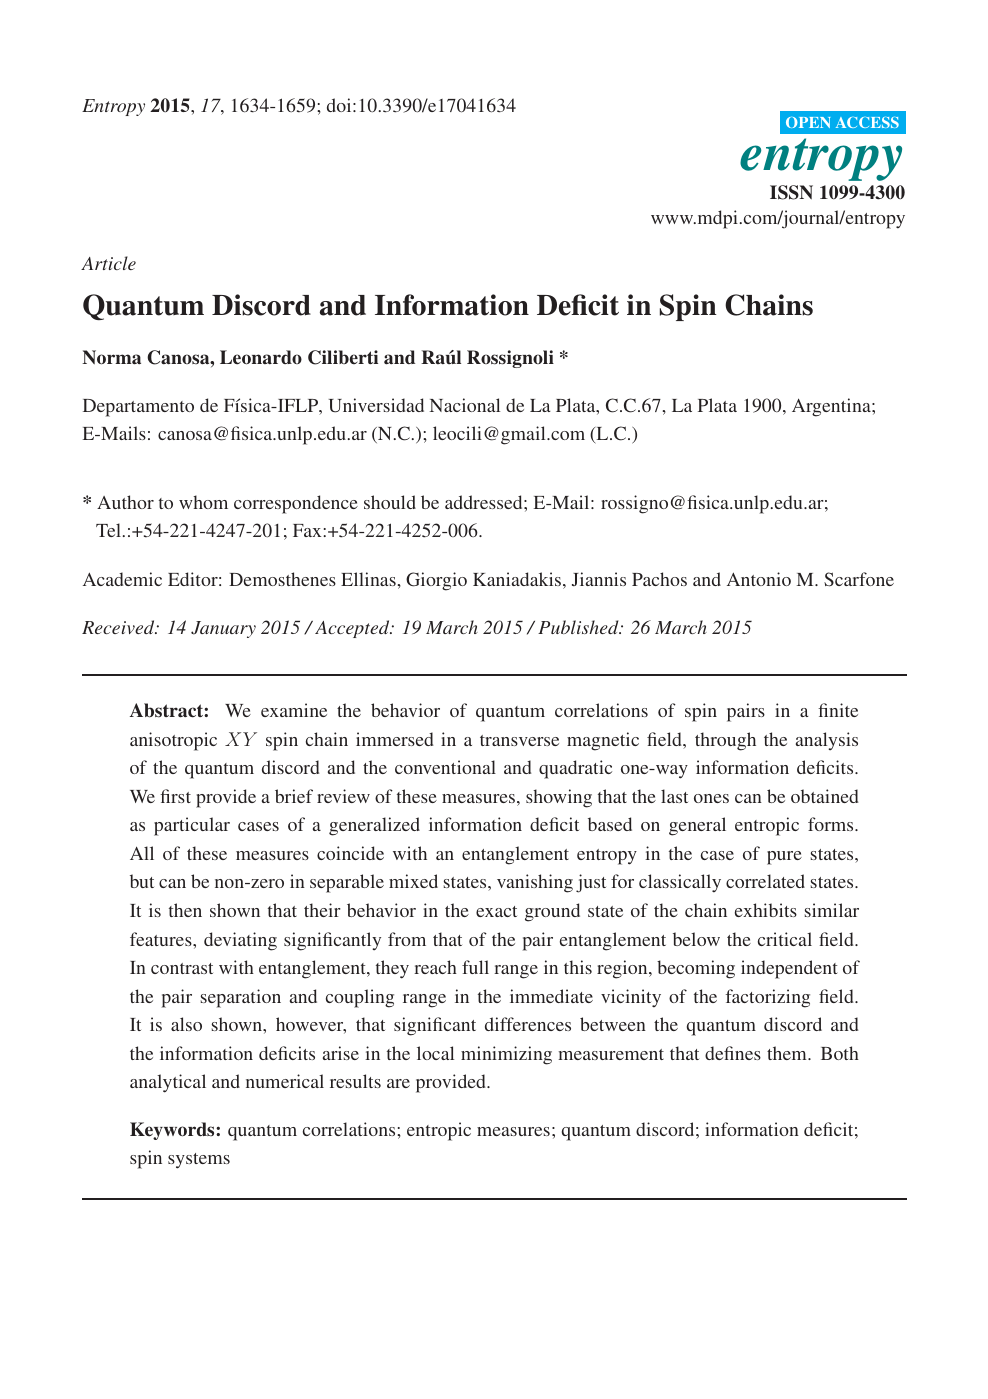 Quantum Discord And Information Deficit In Spin Chains Topic Of Research Paper In Physical Sciences Download Scholarly Article Pdf And Read For Free On Cyberleninka Open Science Hub